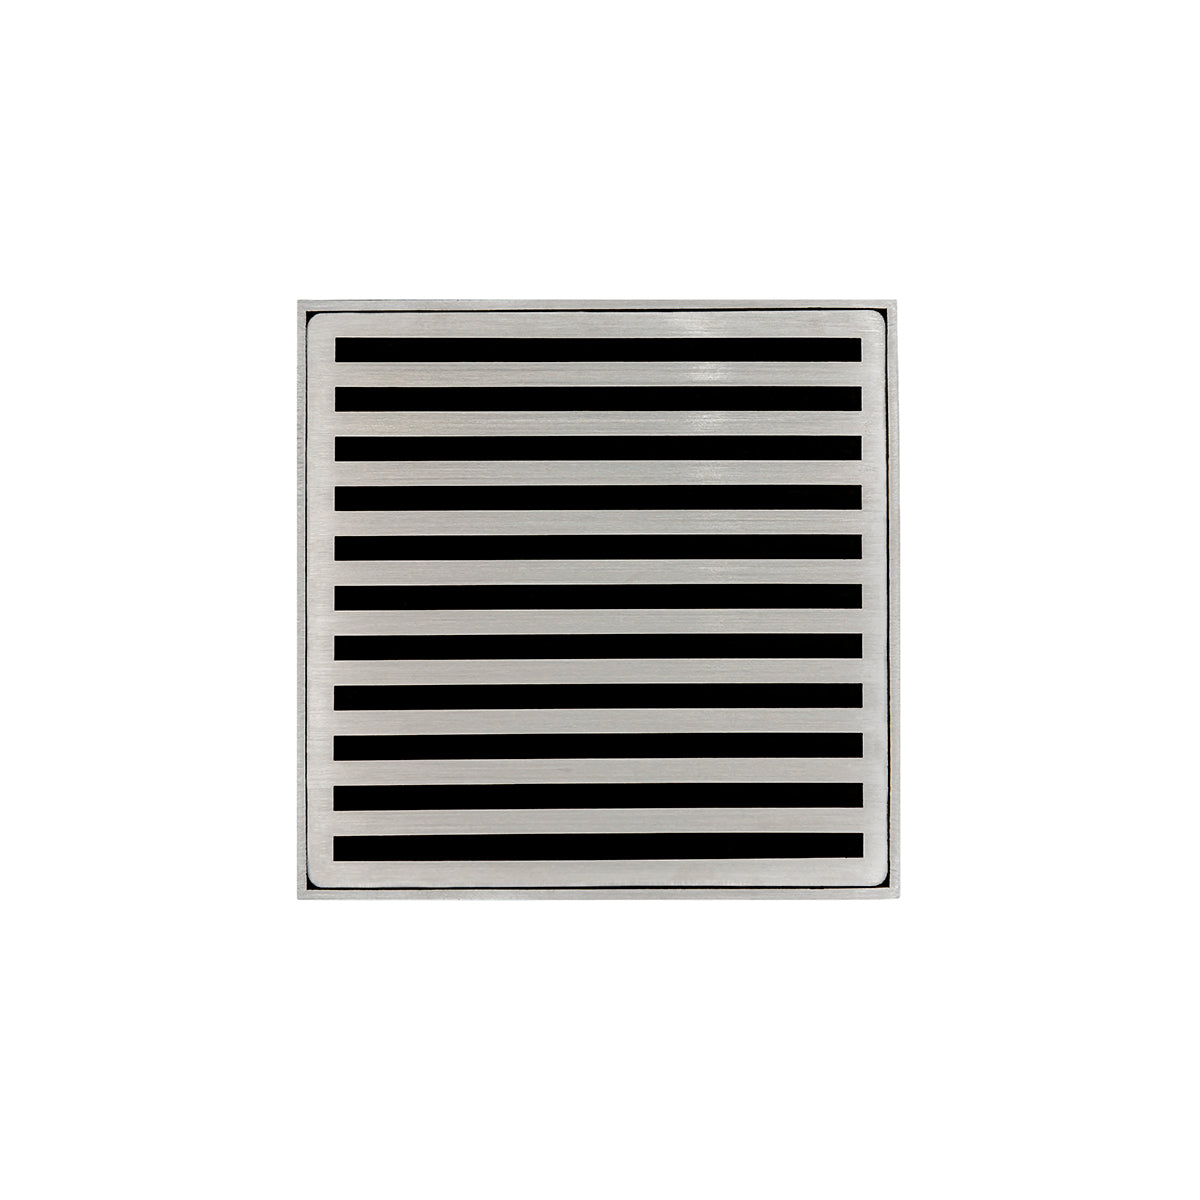 Infinity Drain 5" x 5" ND 5 High Flow Premium Center Drain Kit with Lines Pattern Decorative Plate with Cast Iron Drain Body, 3" No-Hub Outlet